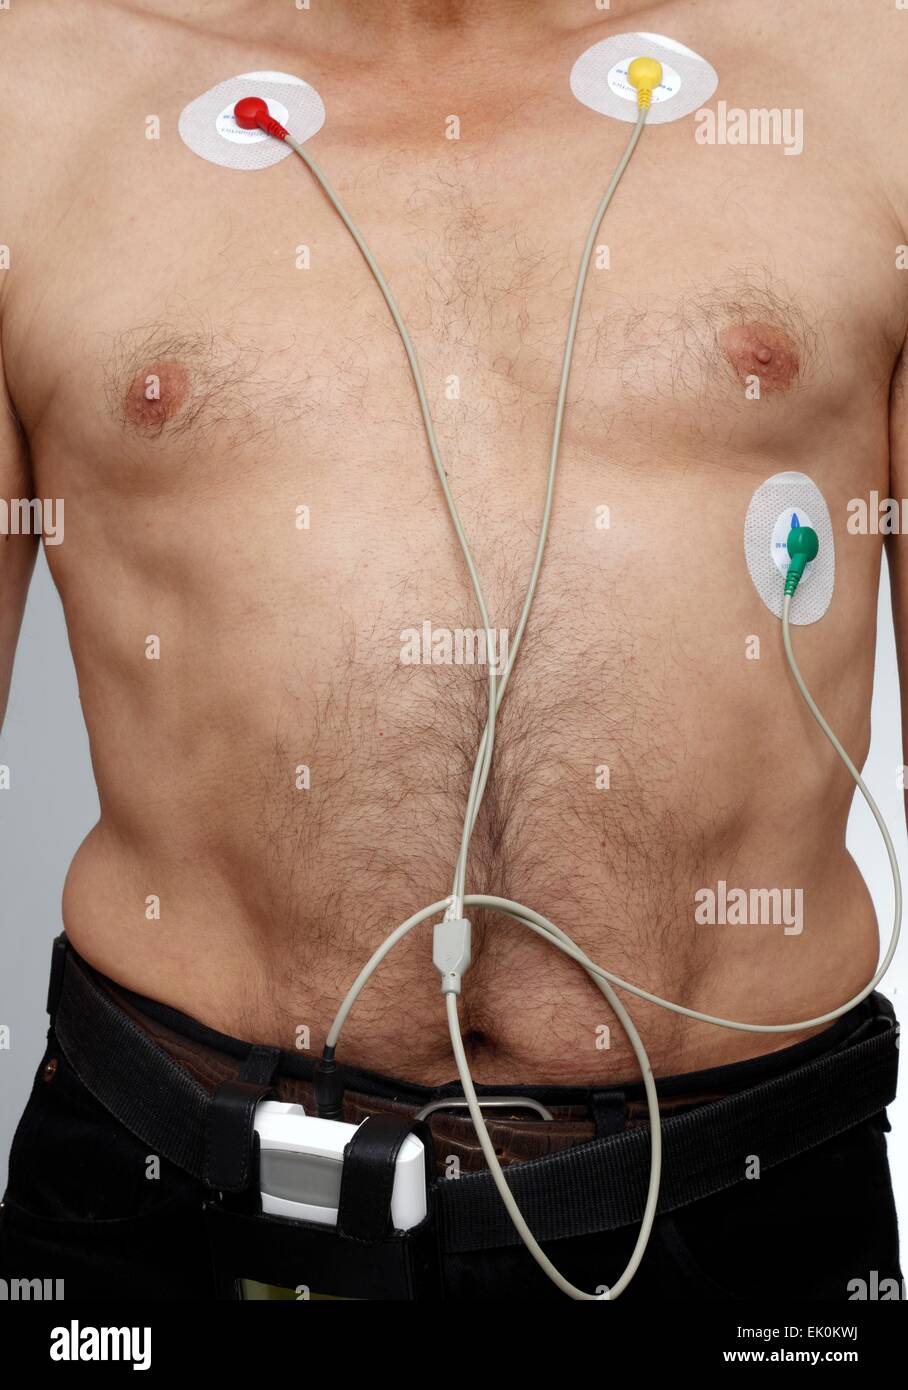 adult, anatomical, anatomy, biological, biology, care, check up, chest, ecg, ekg, electrocardiography, electrodes, front view, health, healthcare, human anatomy, male, man, medical, medicinal, medicine, mid section, monitoring, wires, Stock Photo